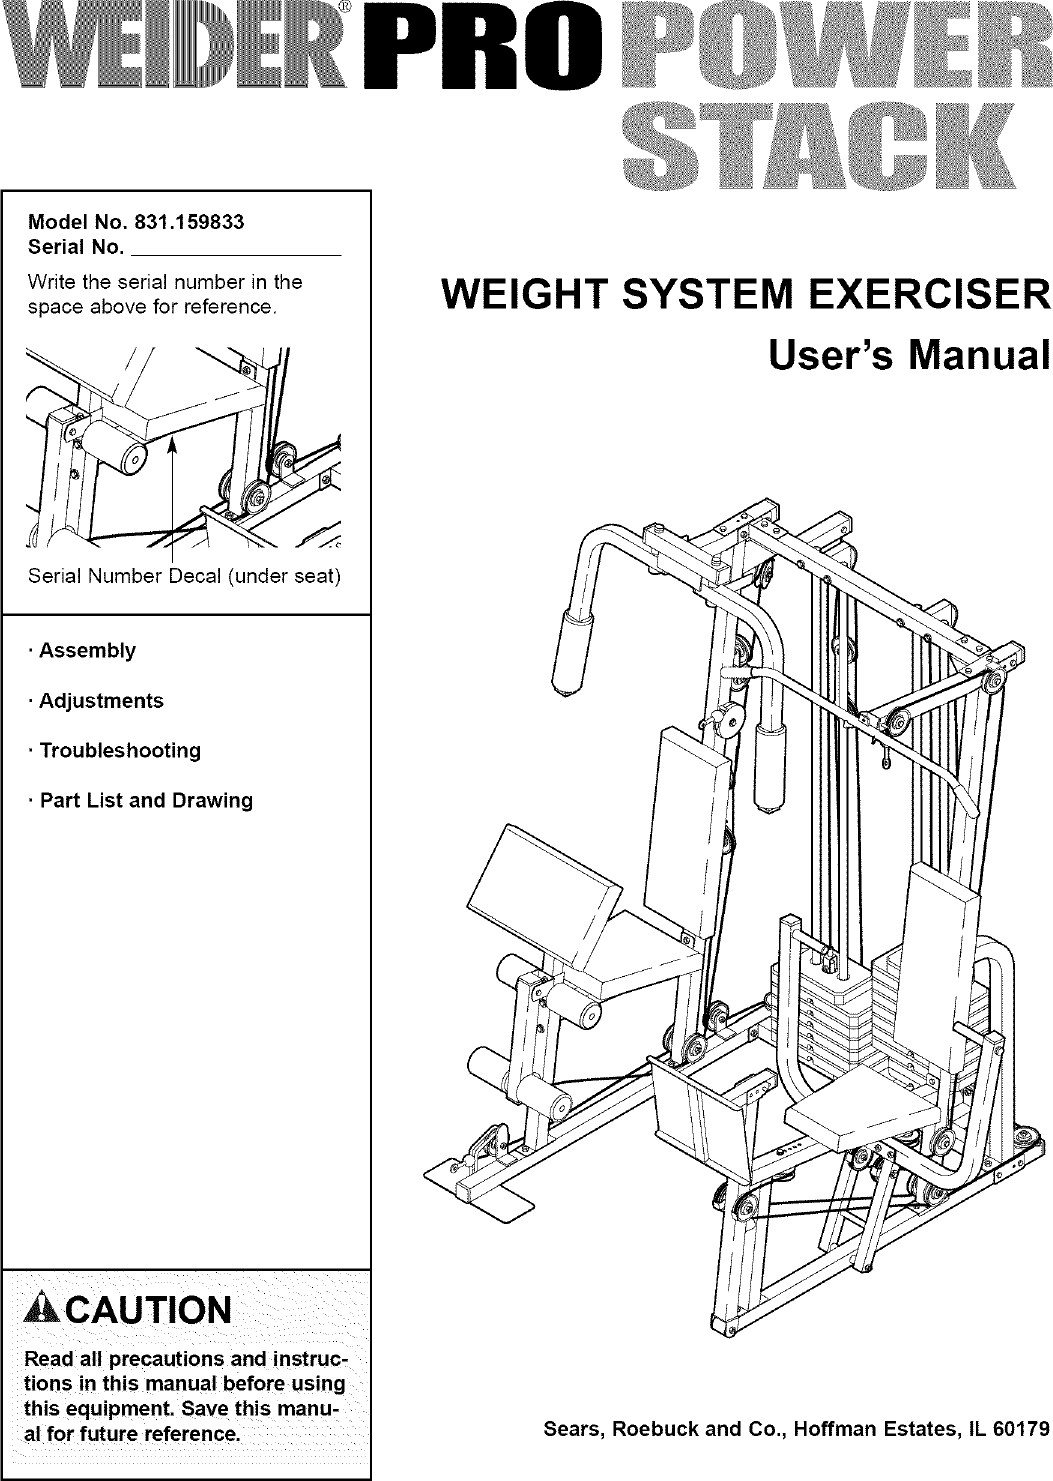 Weider Pro Power Stack 550 Exercise Chart